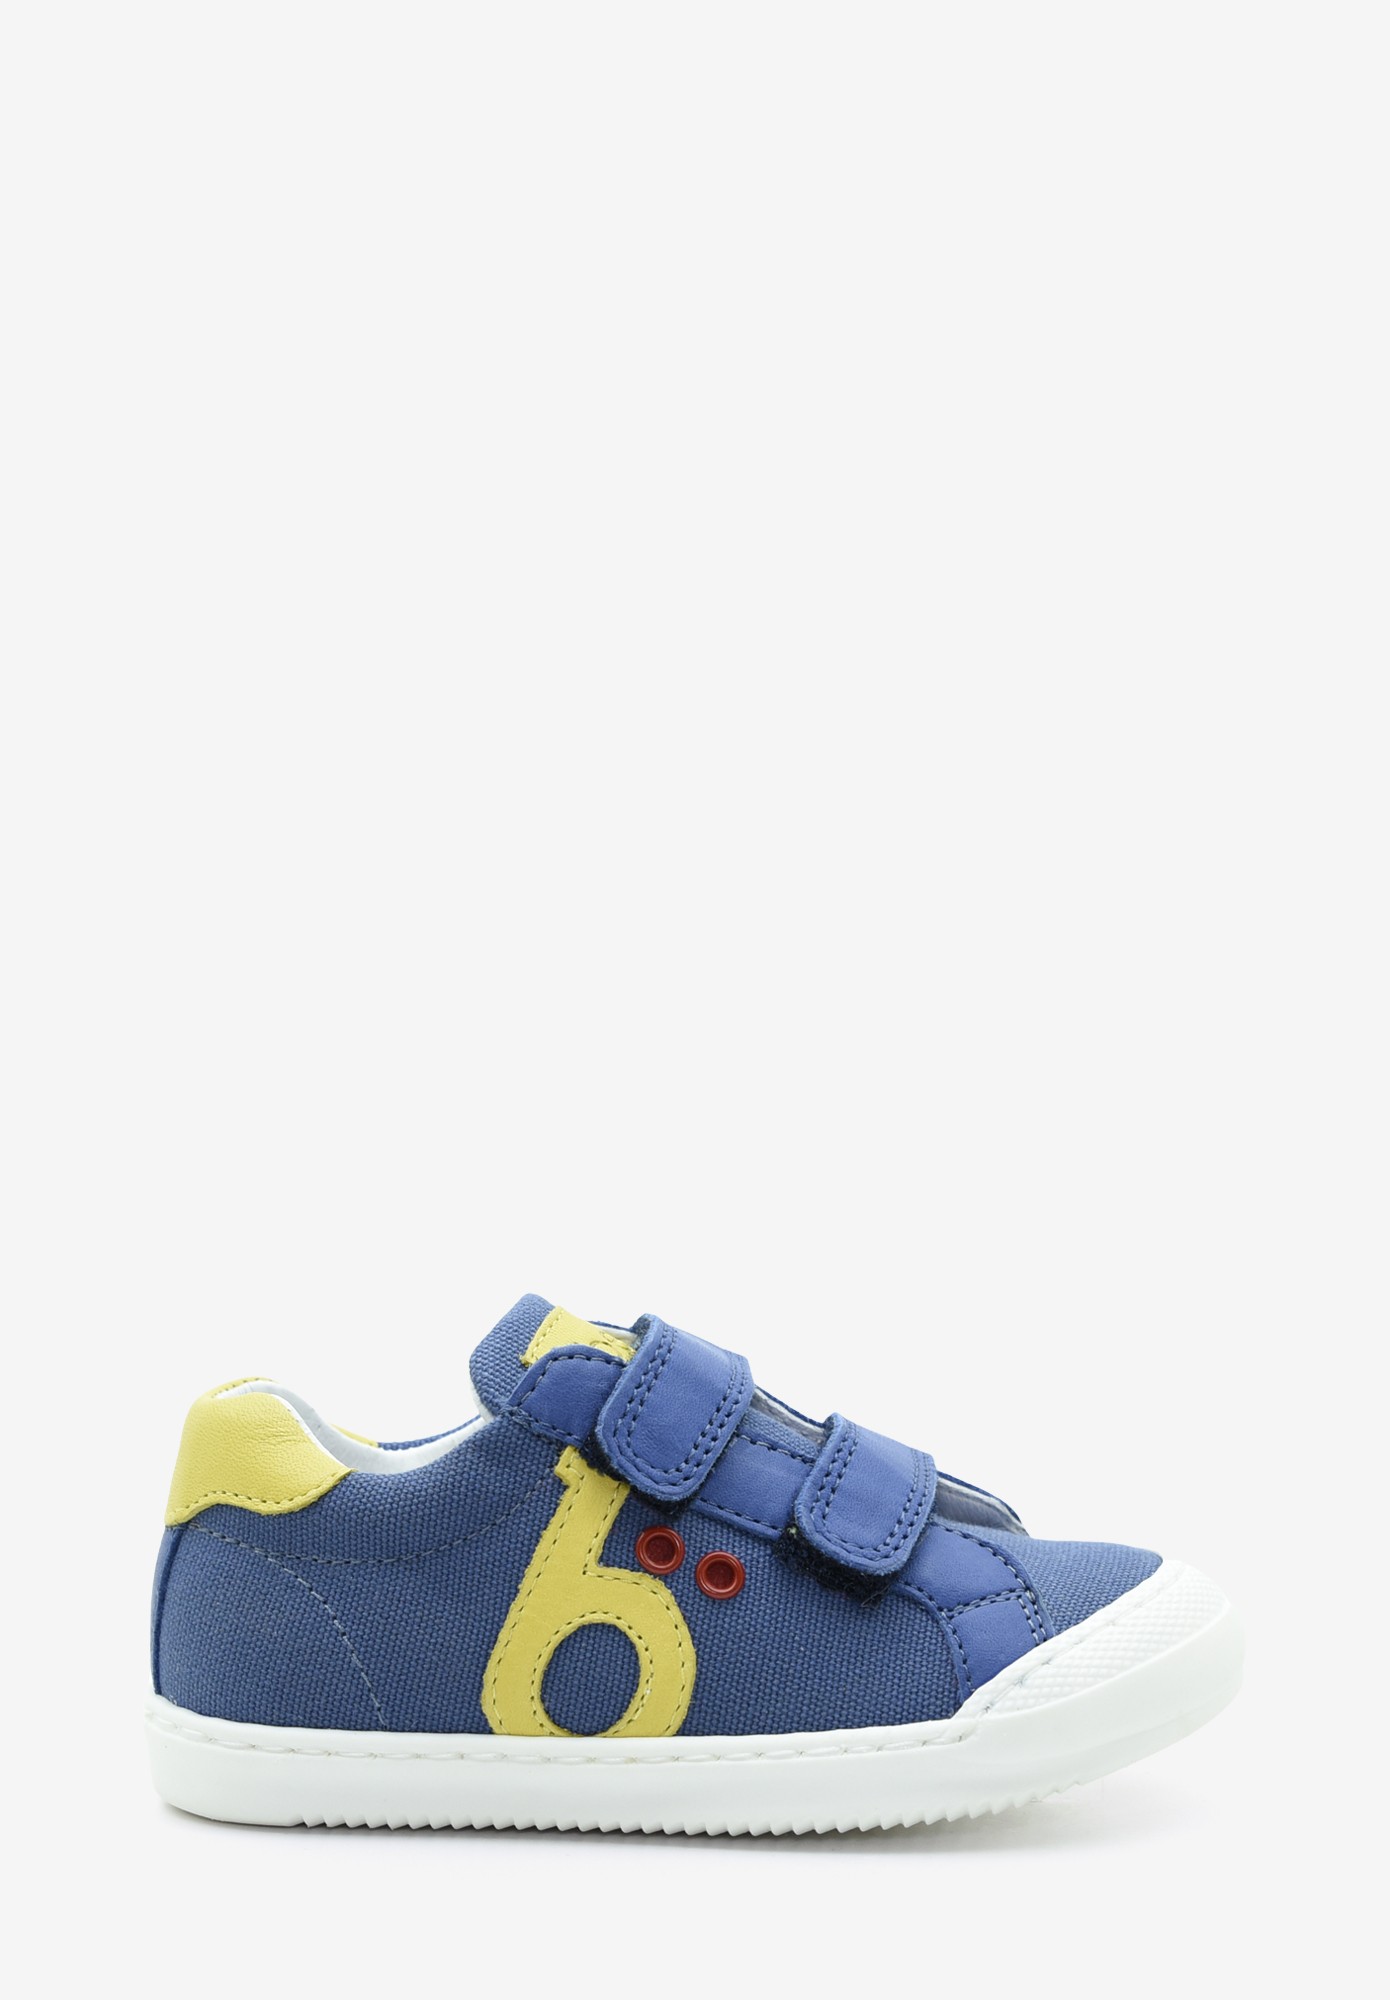 blue and yellow toddler sneakers